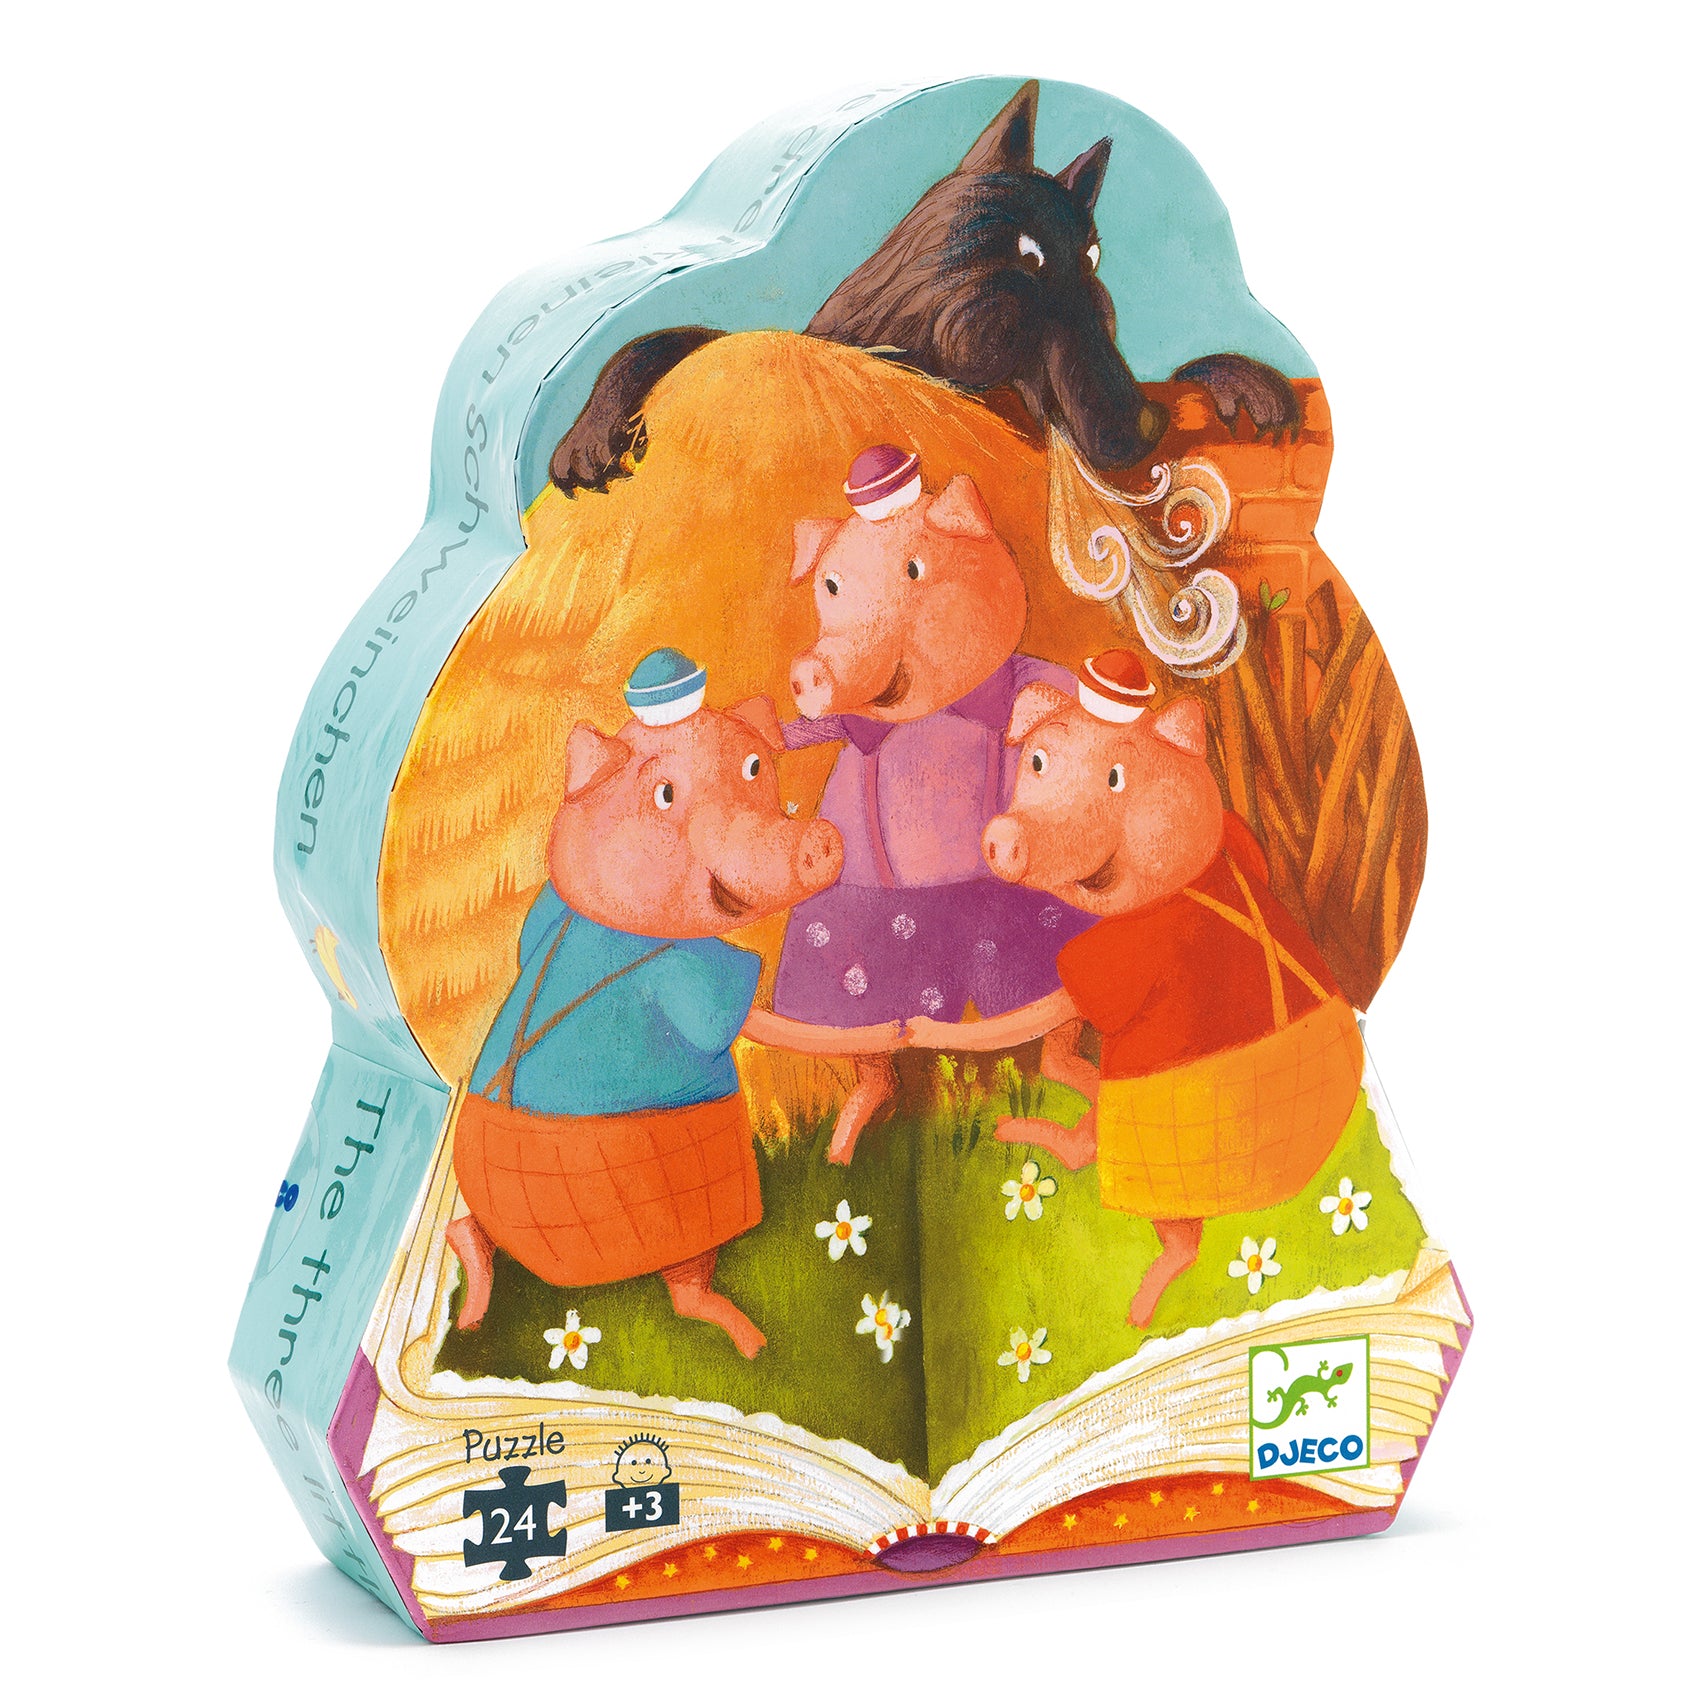 Djeco 24 Piece The 3 Little Pigs Jigsaw Puzzle